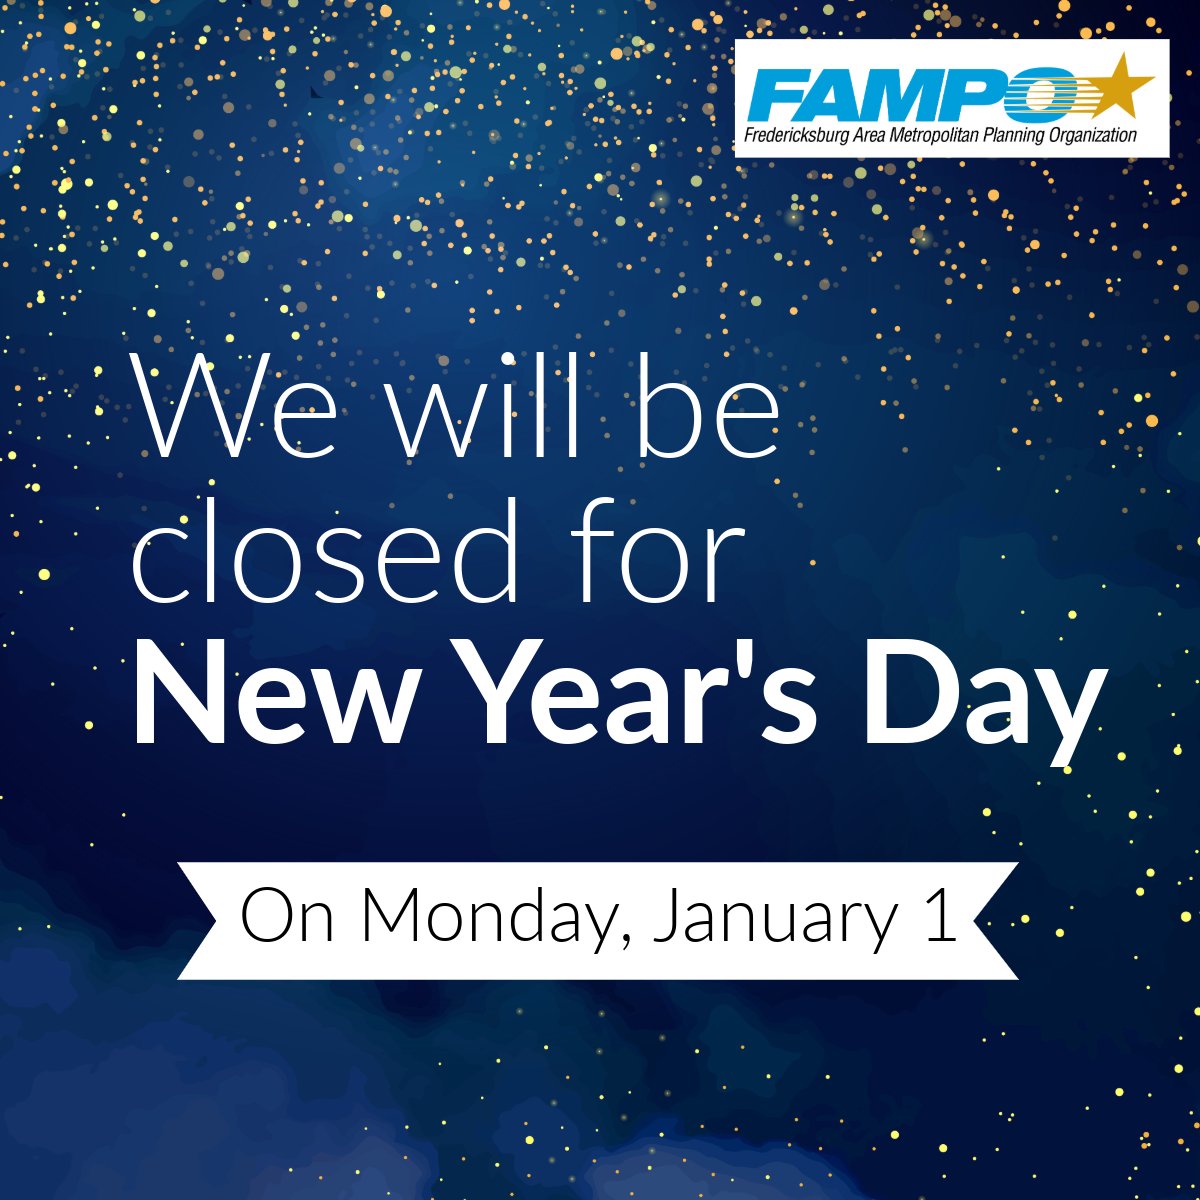 Our office will be closed on Monday, January 1, for New Year's Day. See you again on January 2!

#holiday #officeclosed #mpo #transportation #newyear #newyearday